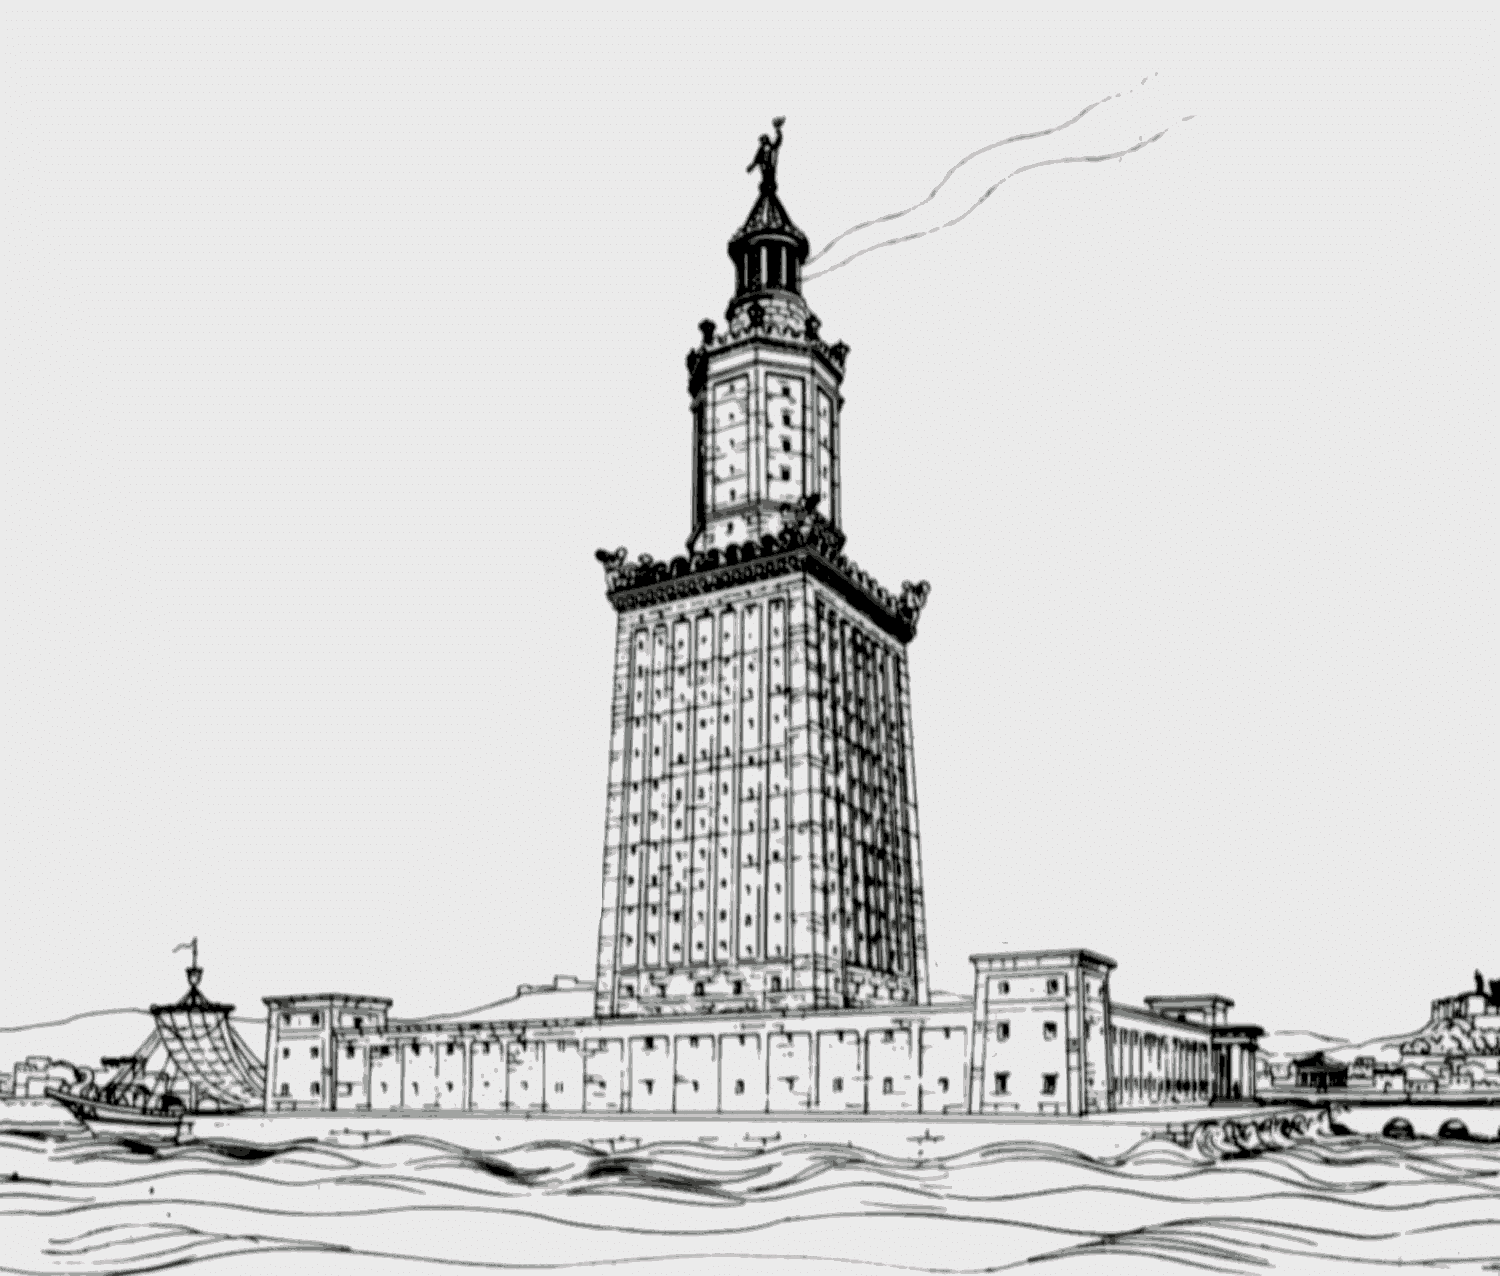 An imaginary picture of the Lighthouse of Alexandria